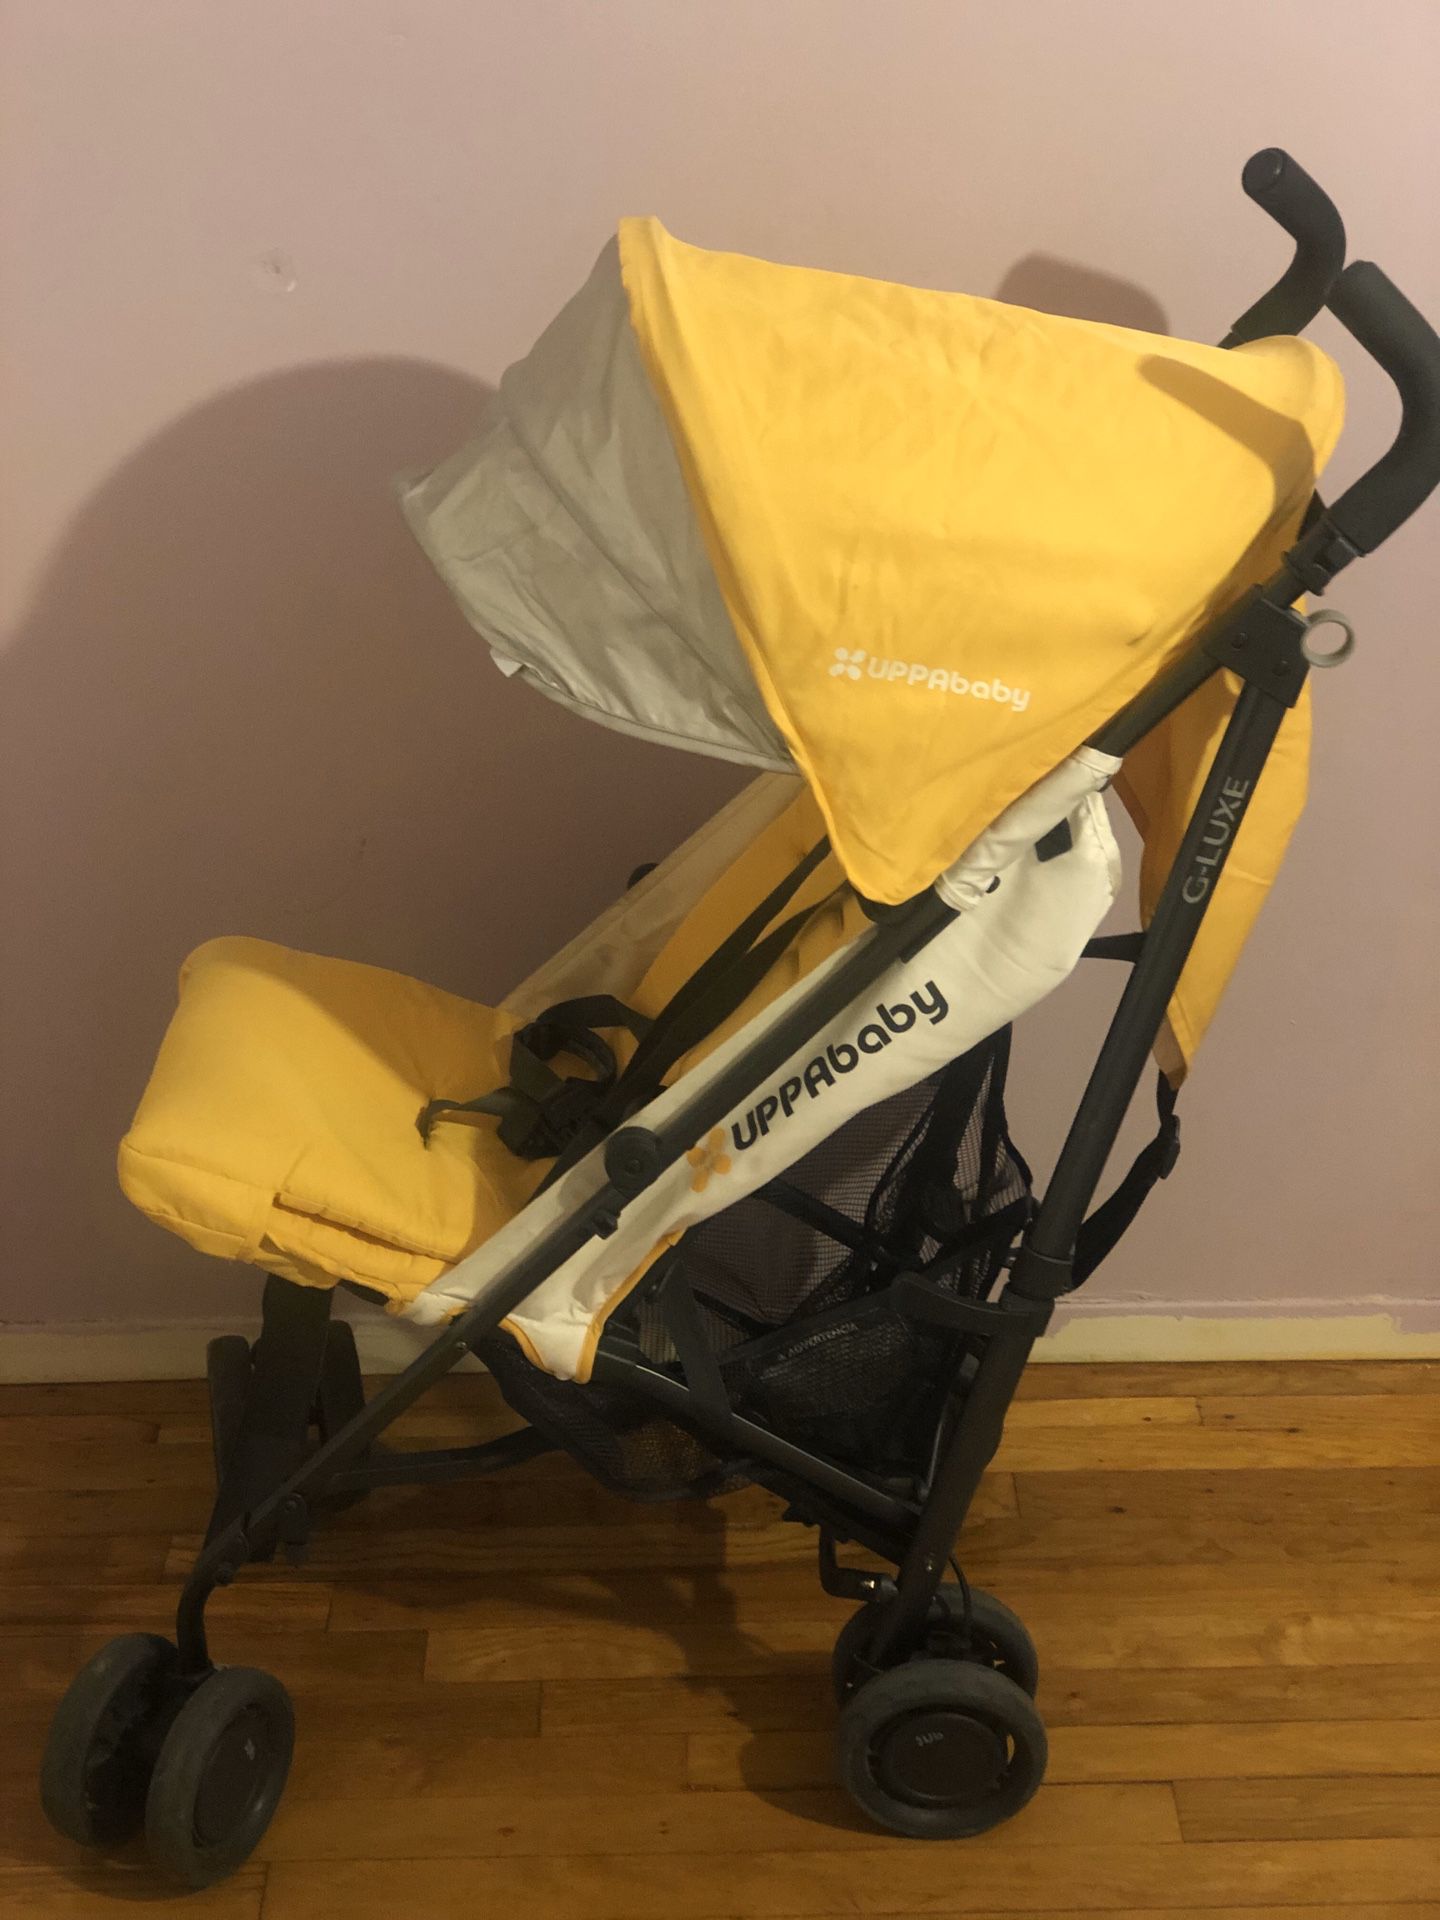 Uppababy G Luxe stroller